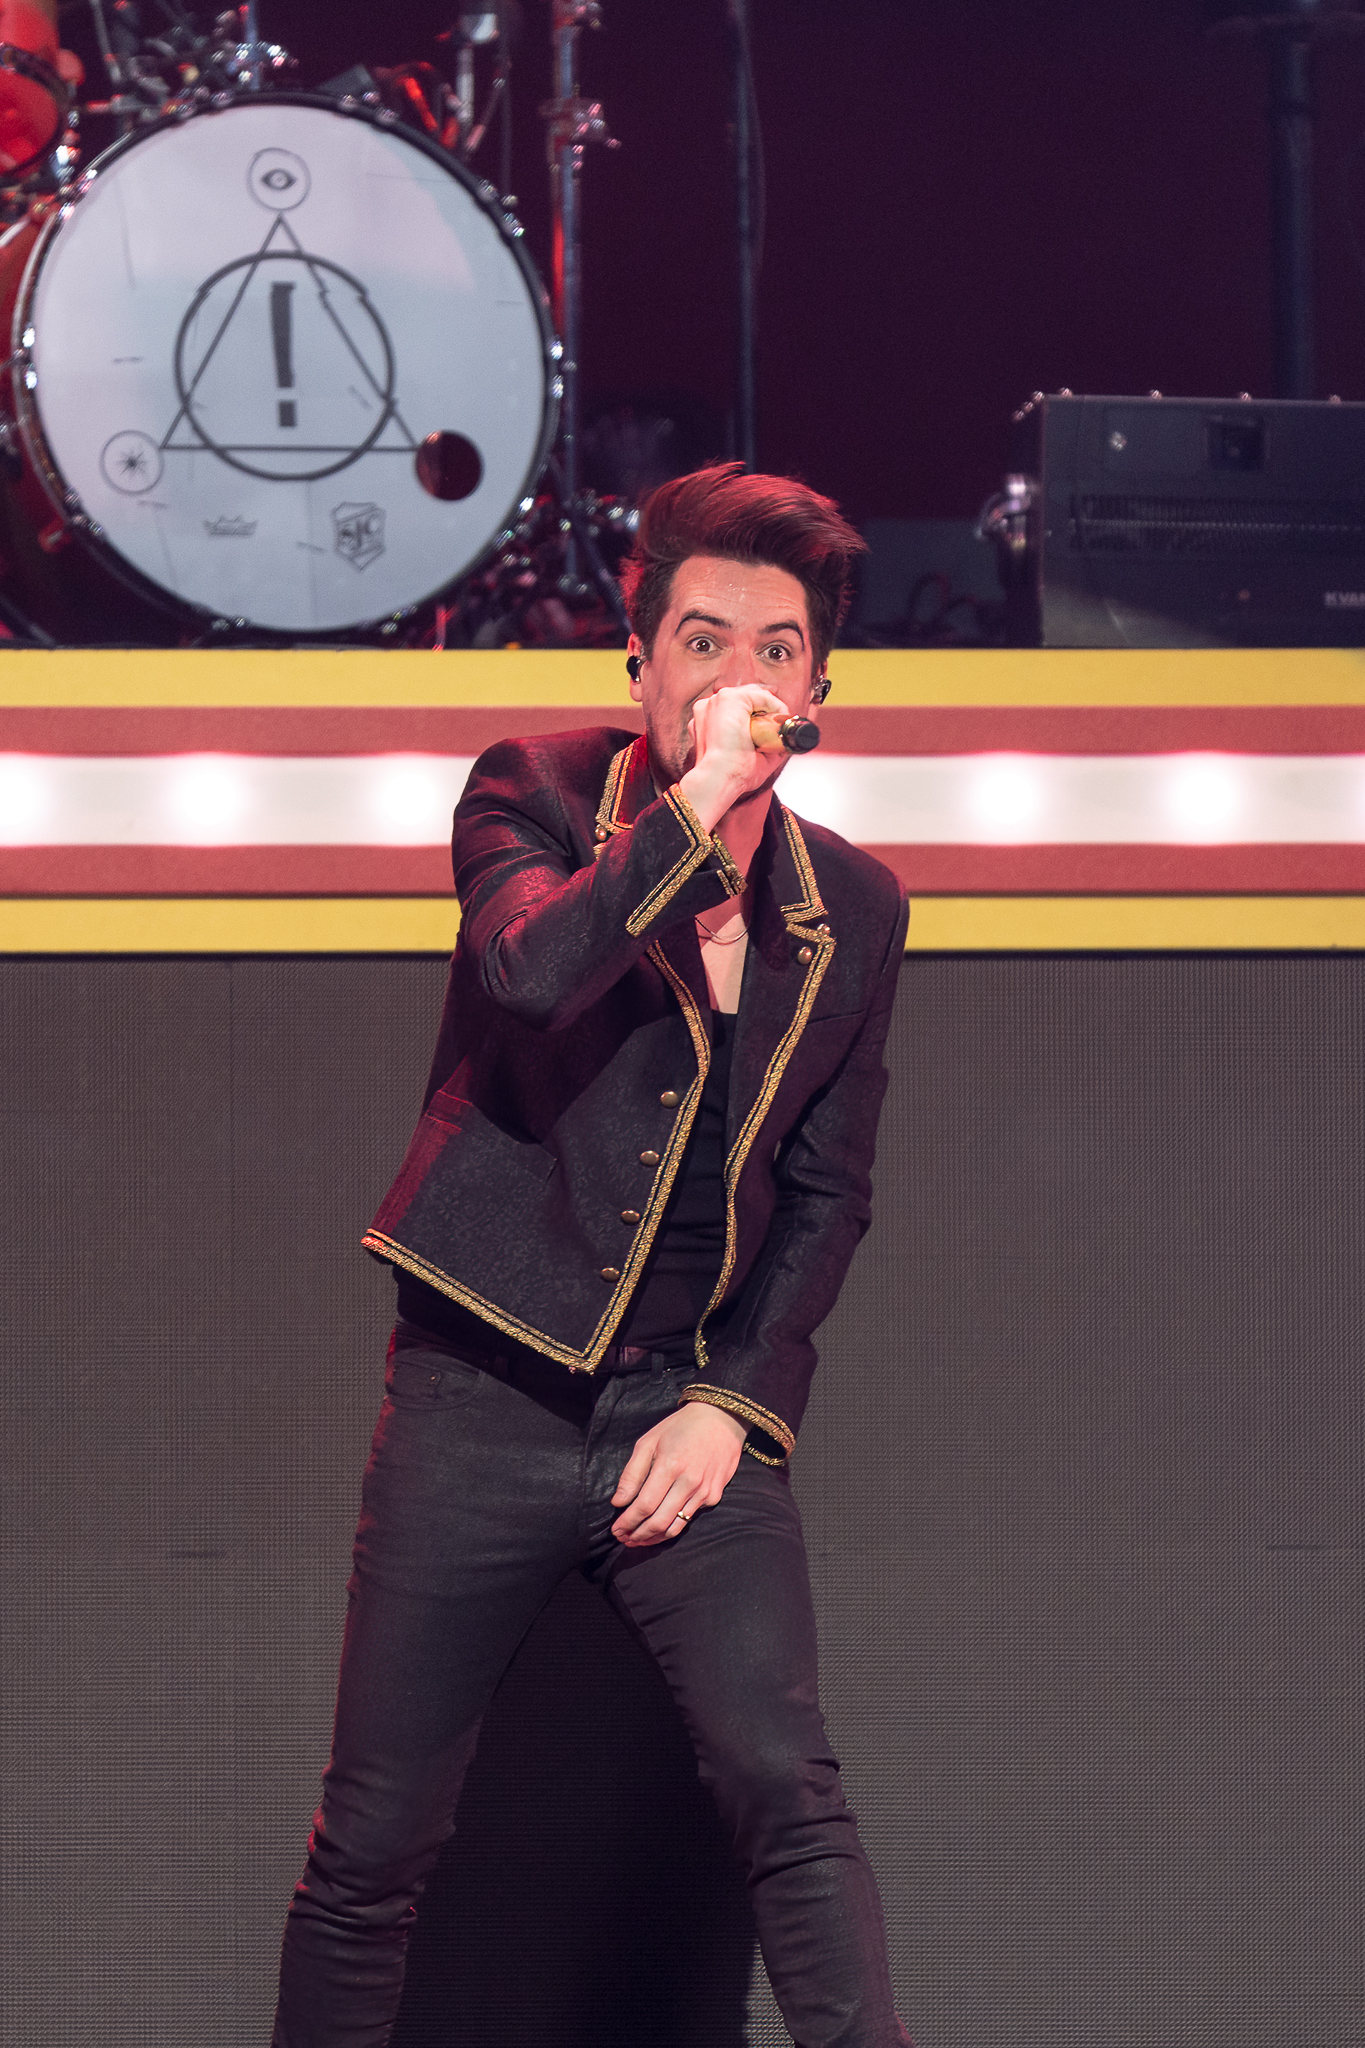 Panic! at the Disco perform at Moda Center in Portland, Oregon on October 15, 2022.